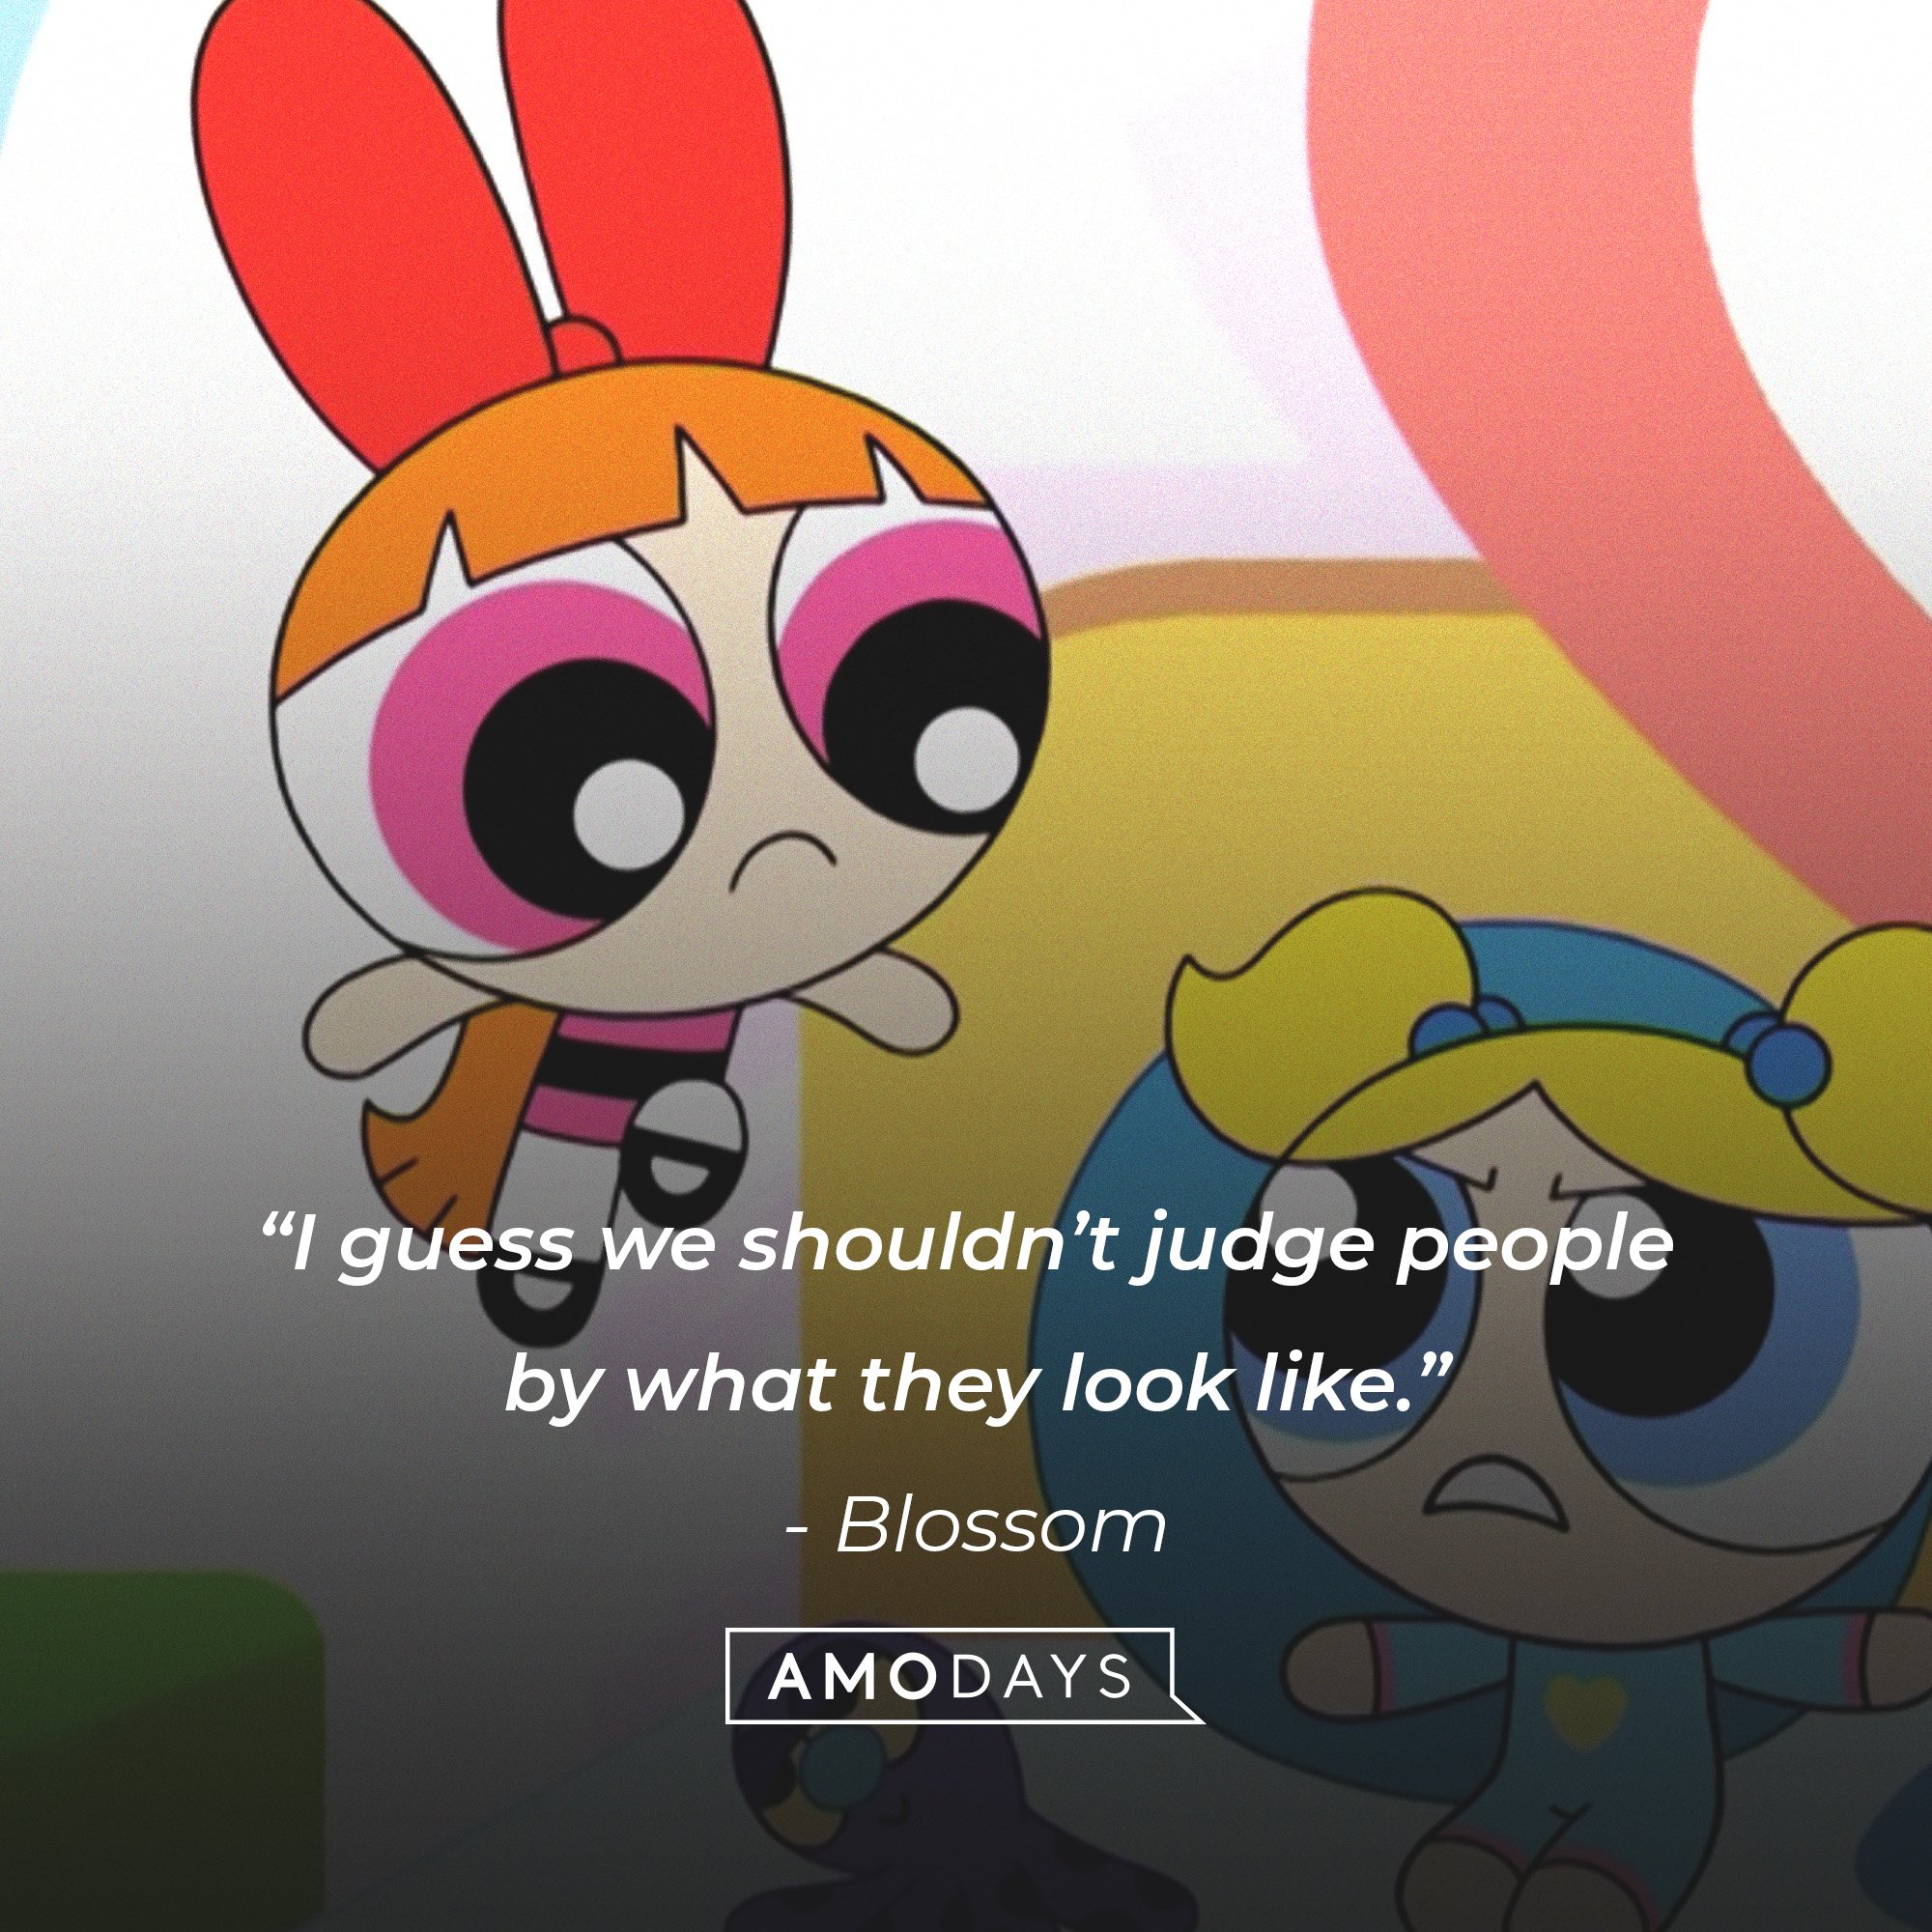 Blossom’s quote: “I guess we shouldn’t judge people by what they look like.” | Image: AmoDays